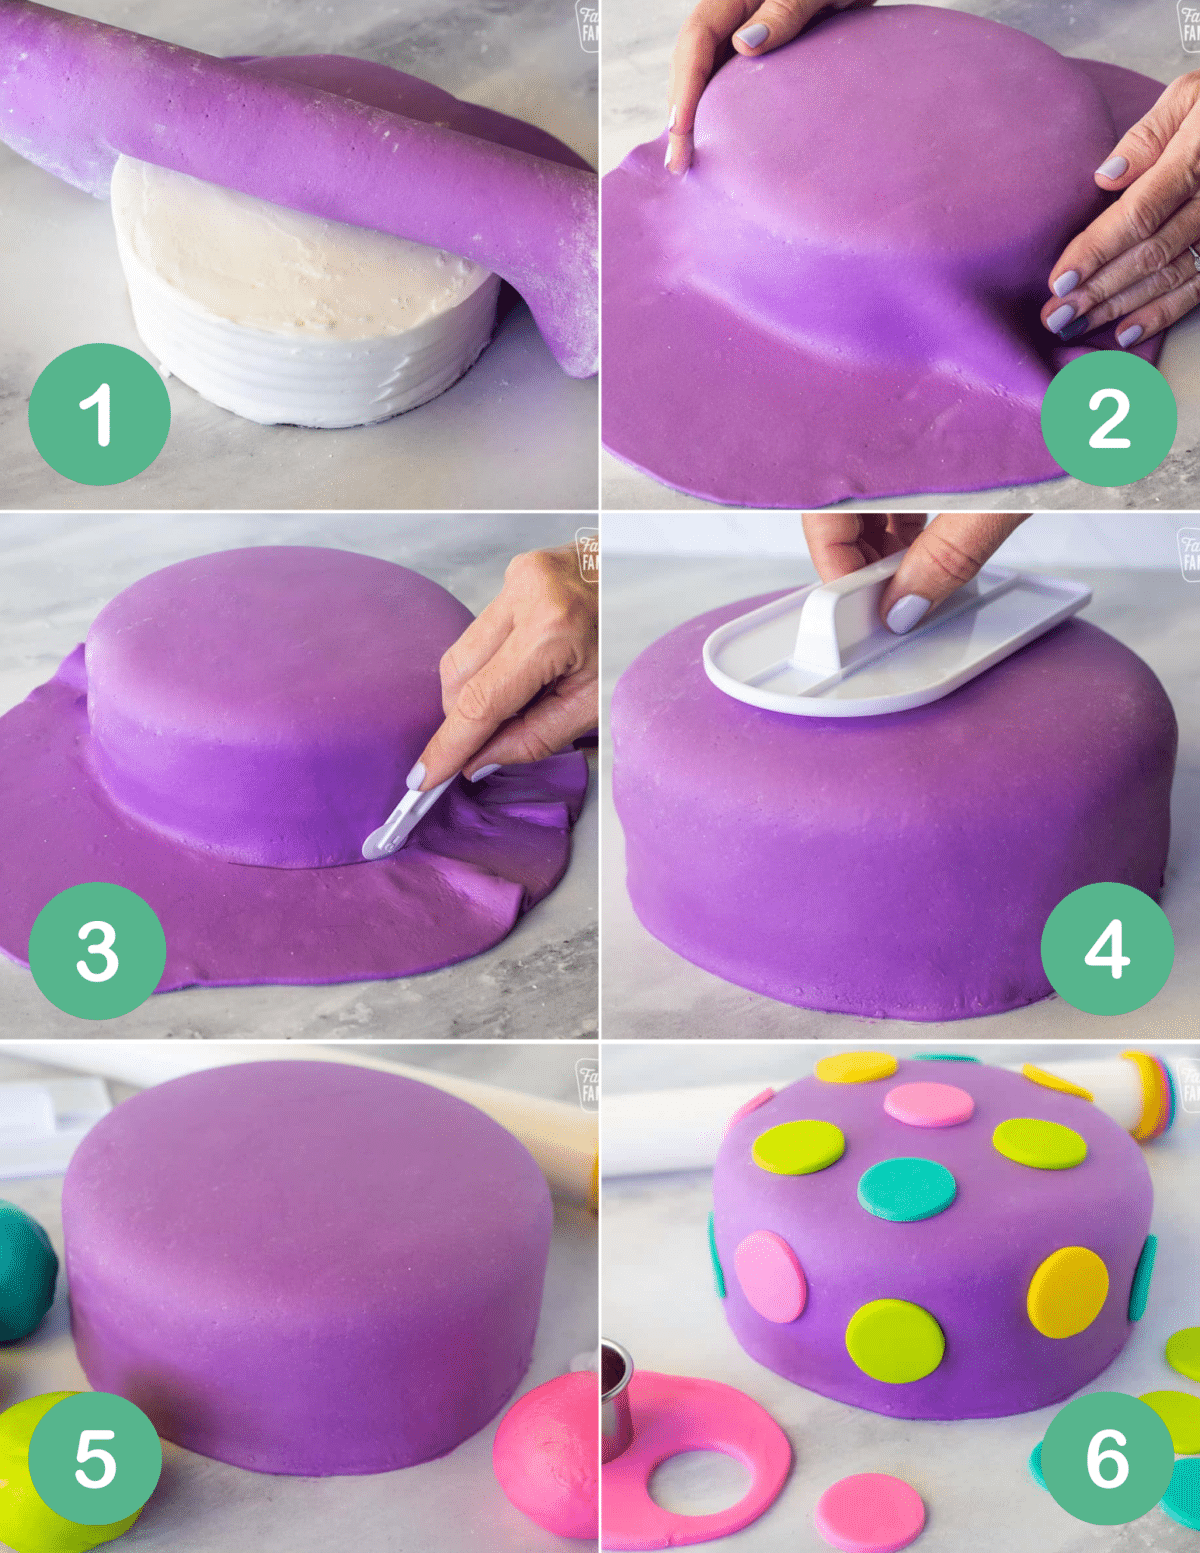 step-by-step photos showing how to cover a cake in fondant, including shaping and smoothing and adding decorations